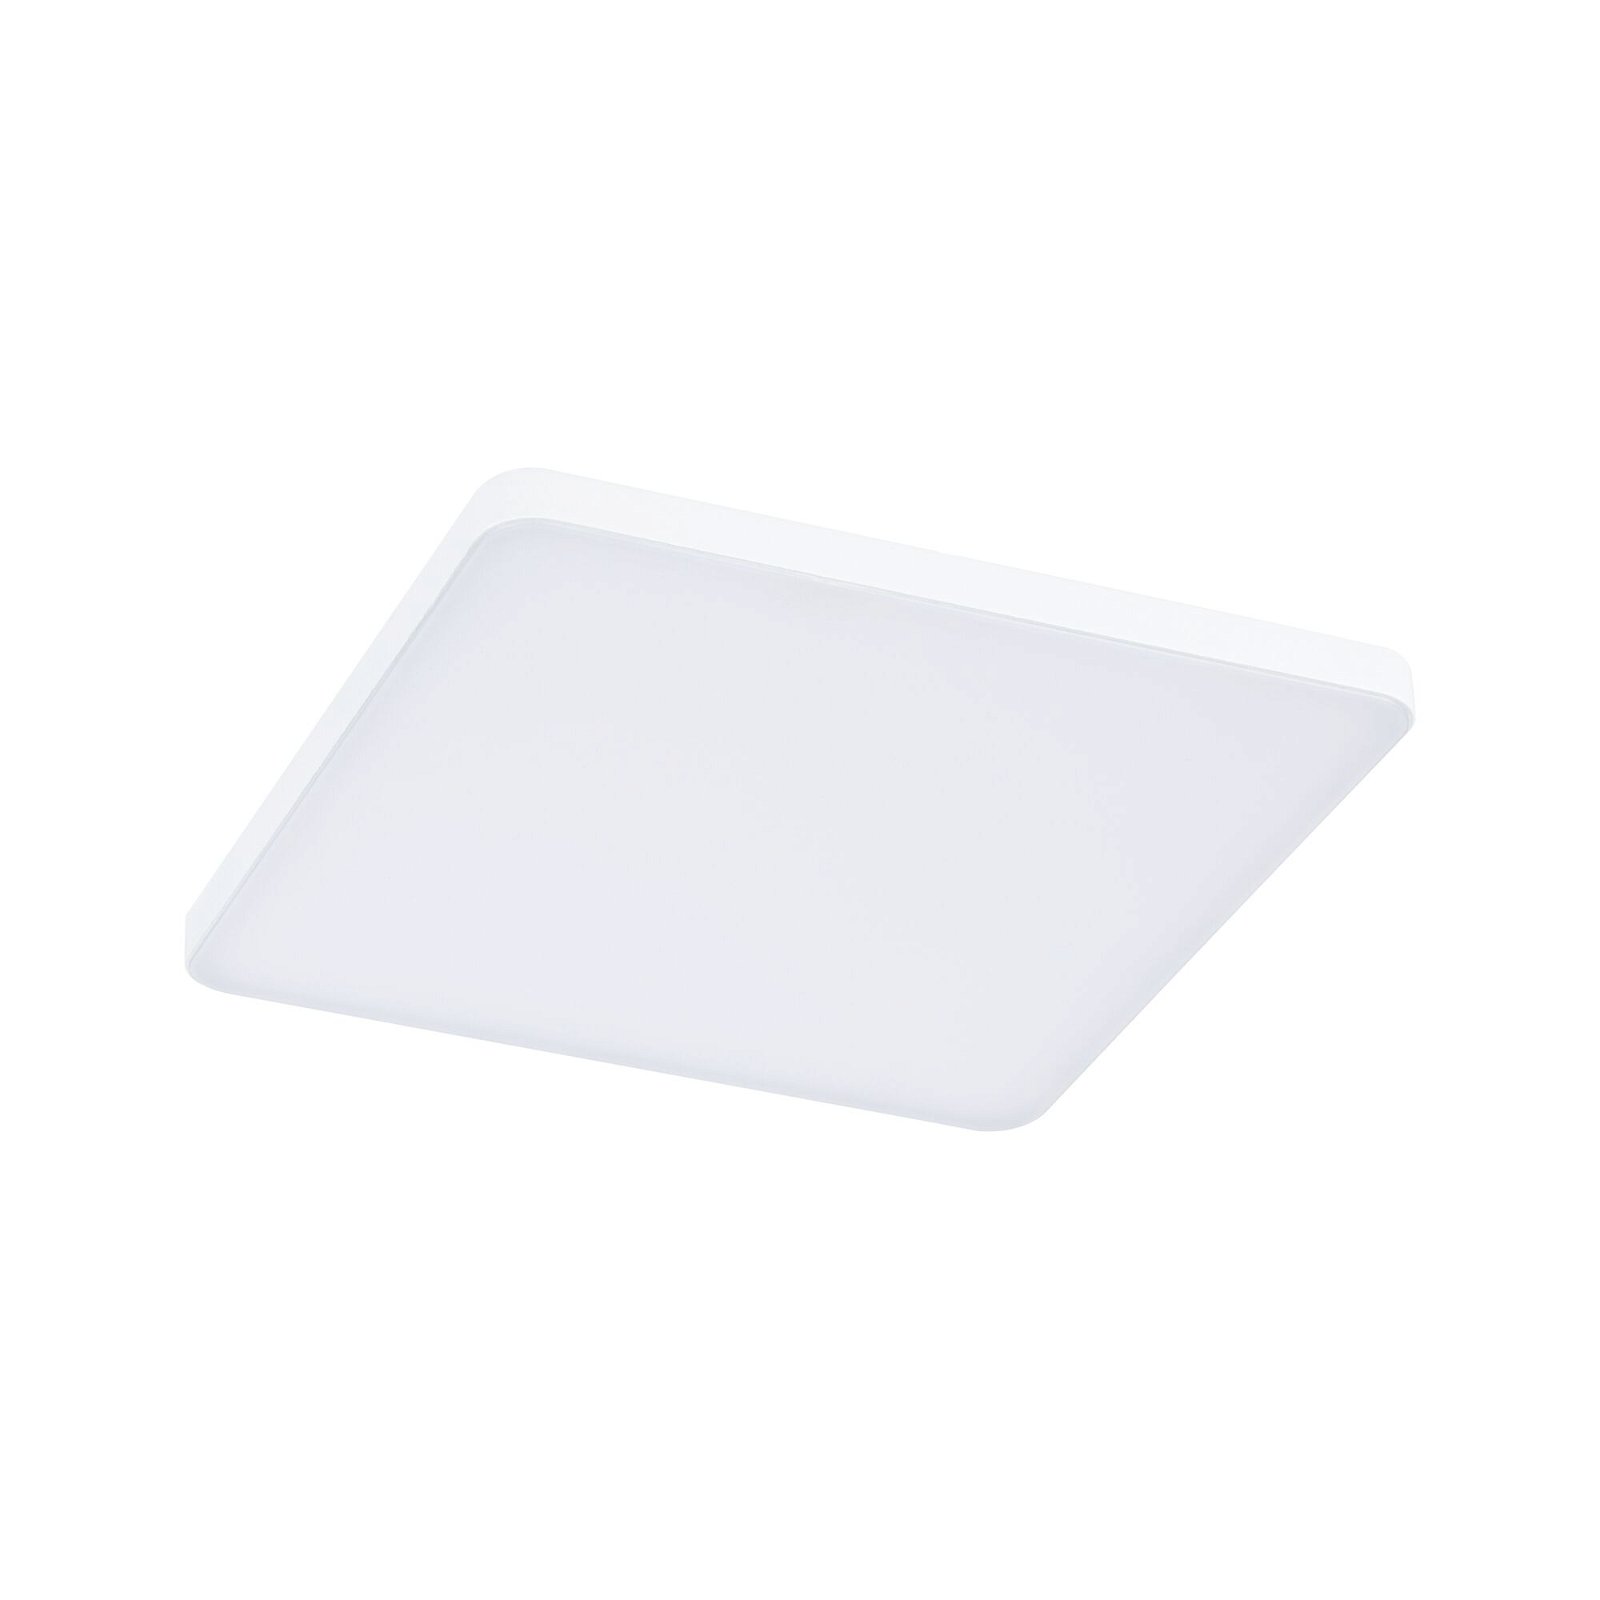 VariFit LED Recessed panel Smart Home Zigbee 3.0 Veluna Edge IP44 square 160x160mm 15,5W 1000lm Tunable White White dimmable